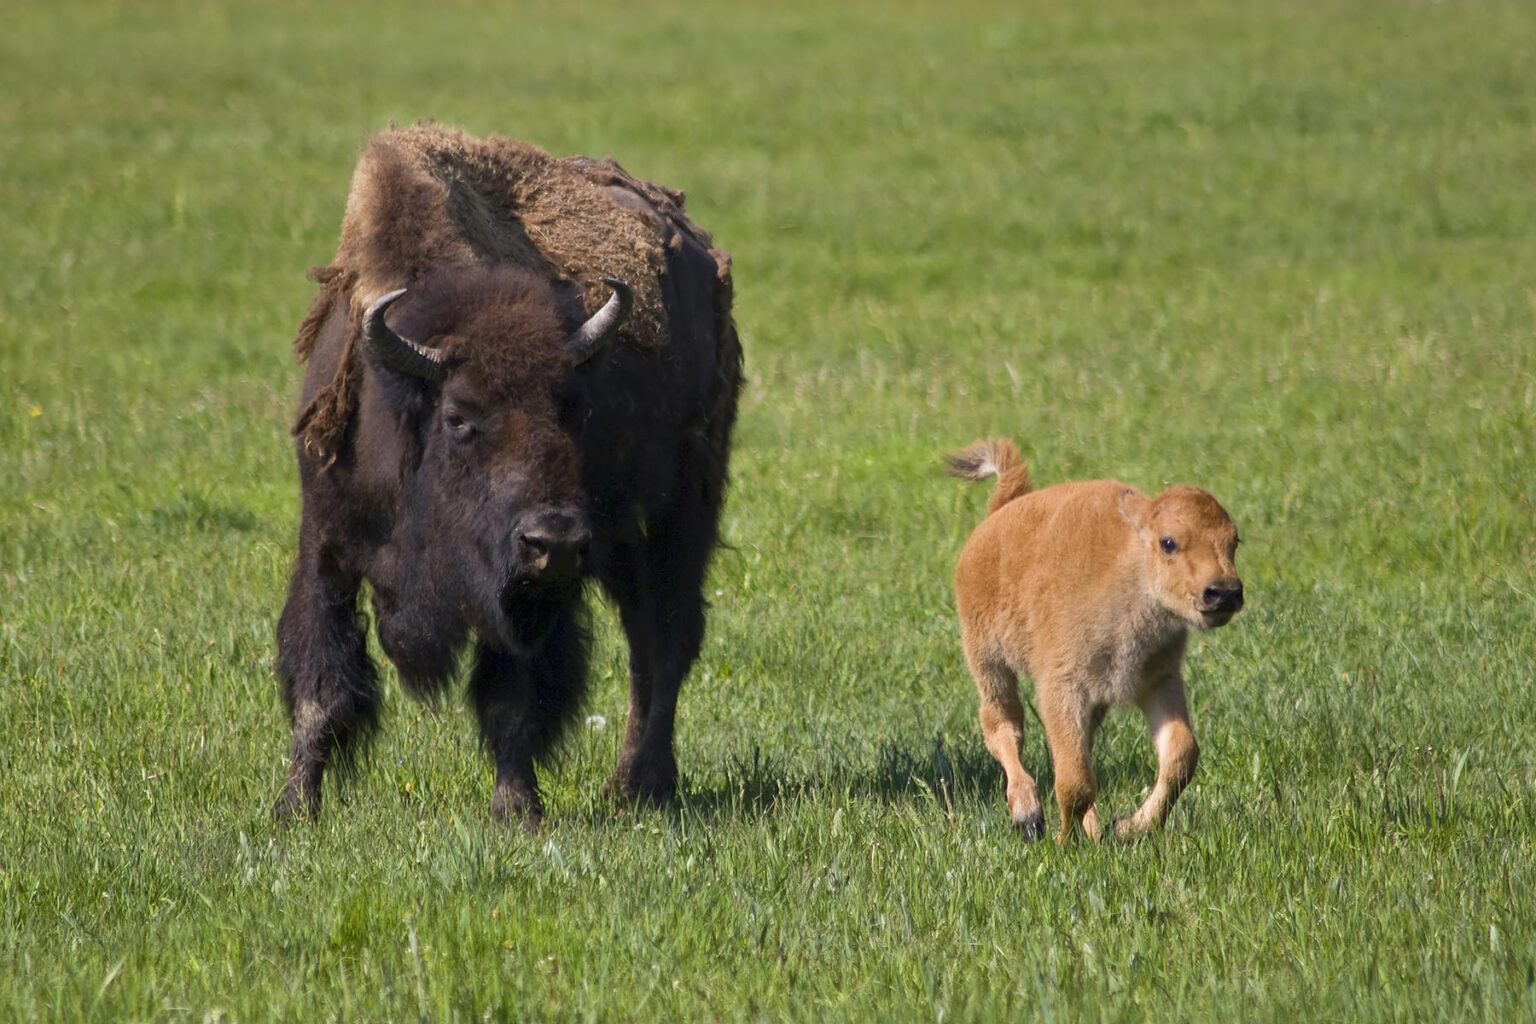 A BISON COW with her frolicking CALF - YELLOWSTONE NATIONAL PARK, WYOMING